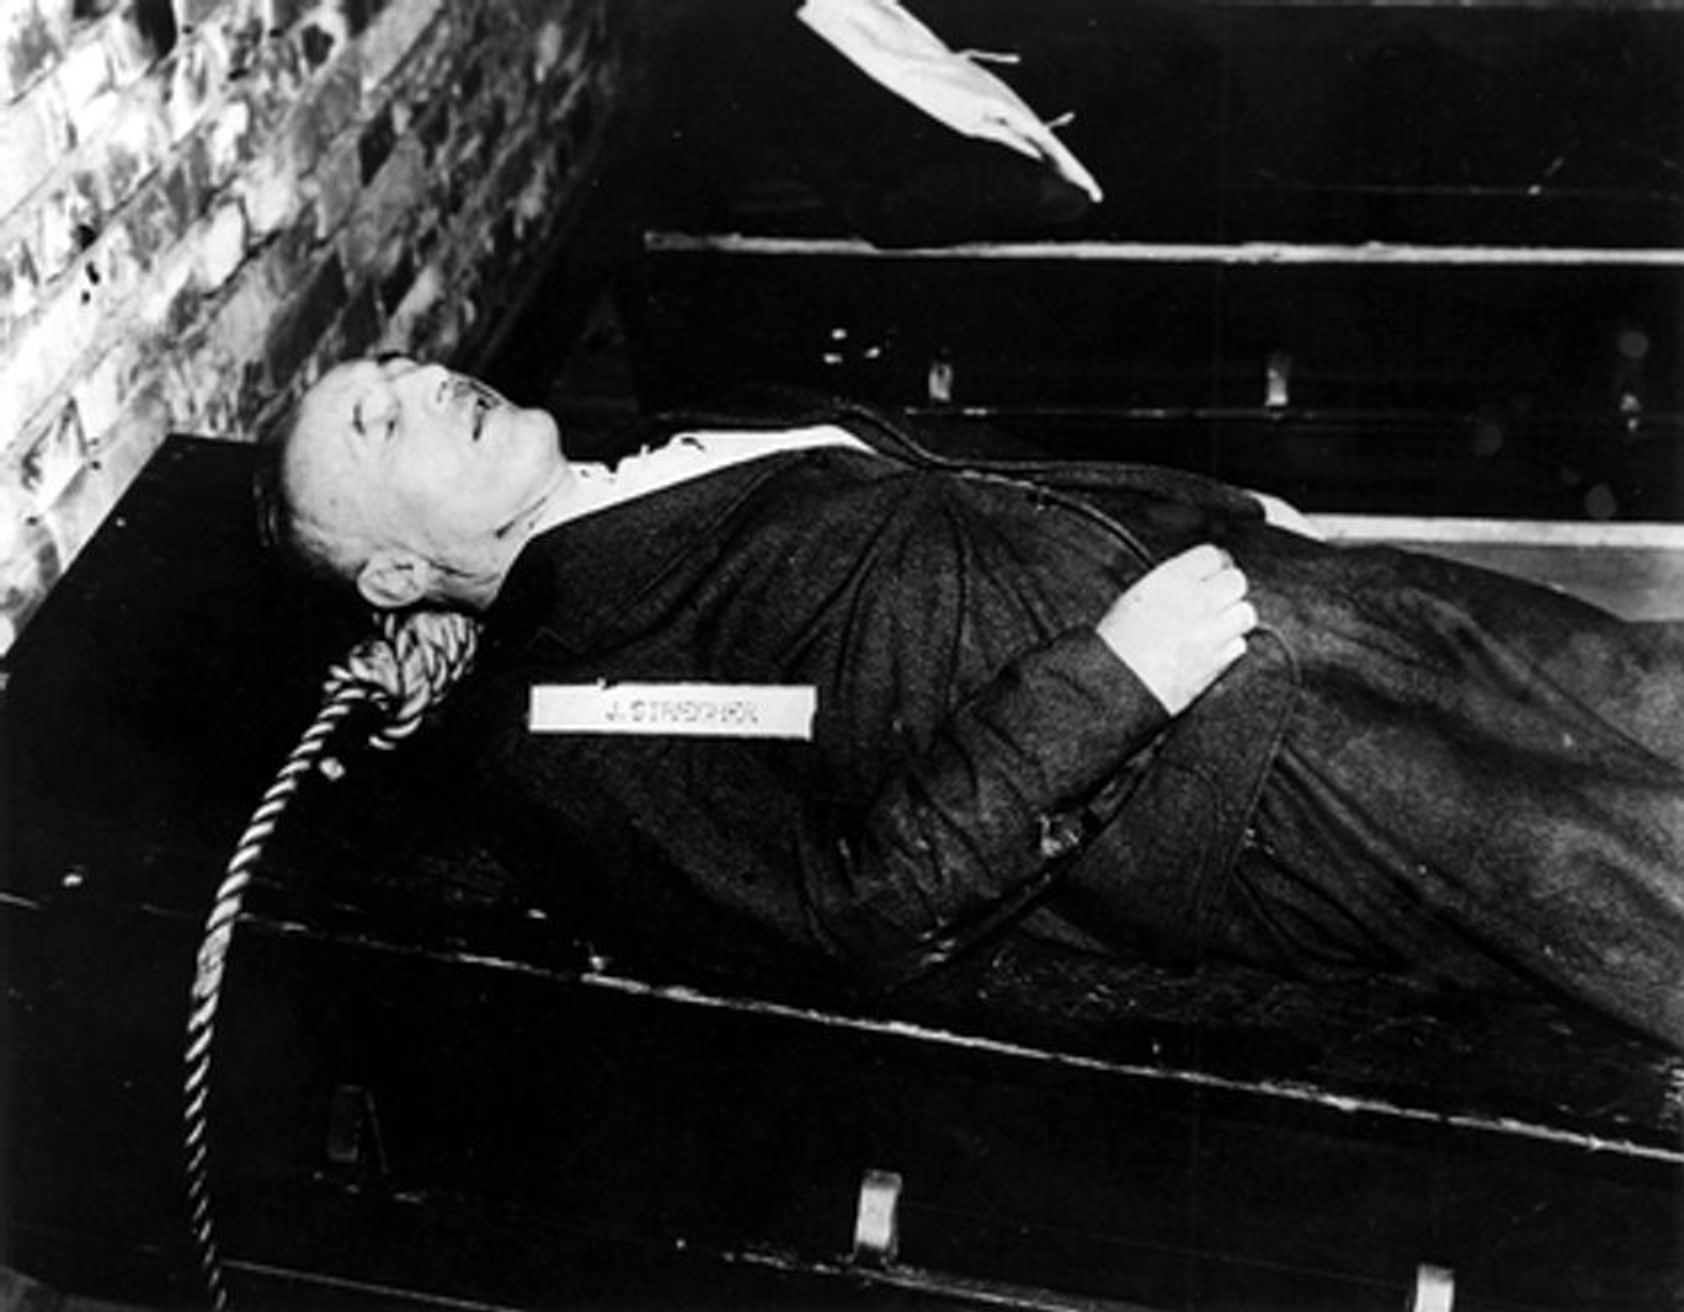 The body of Julius Streicher after hanging, October 16, 1946